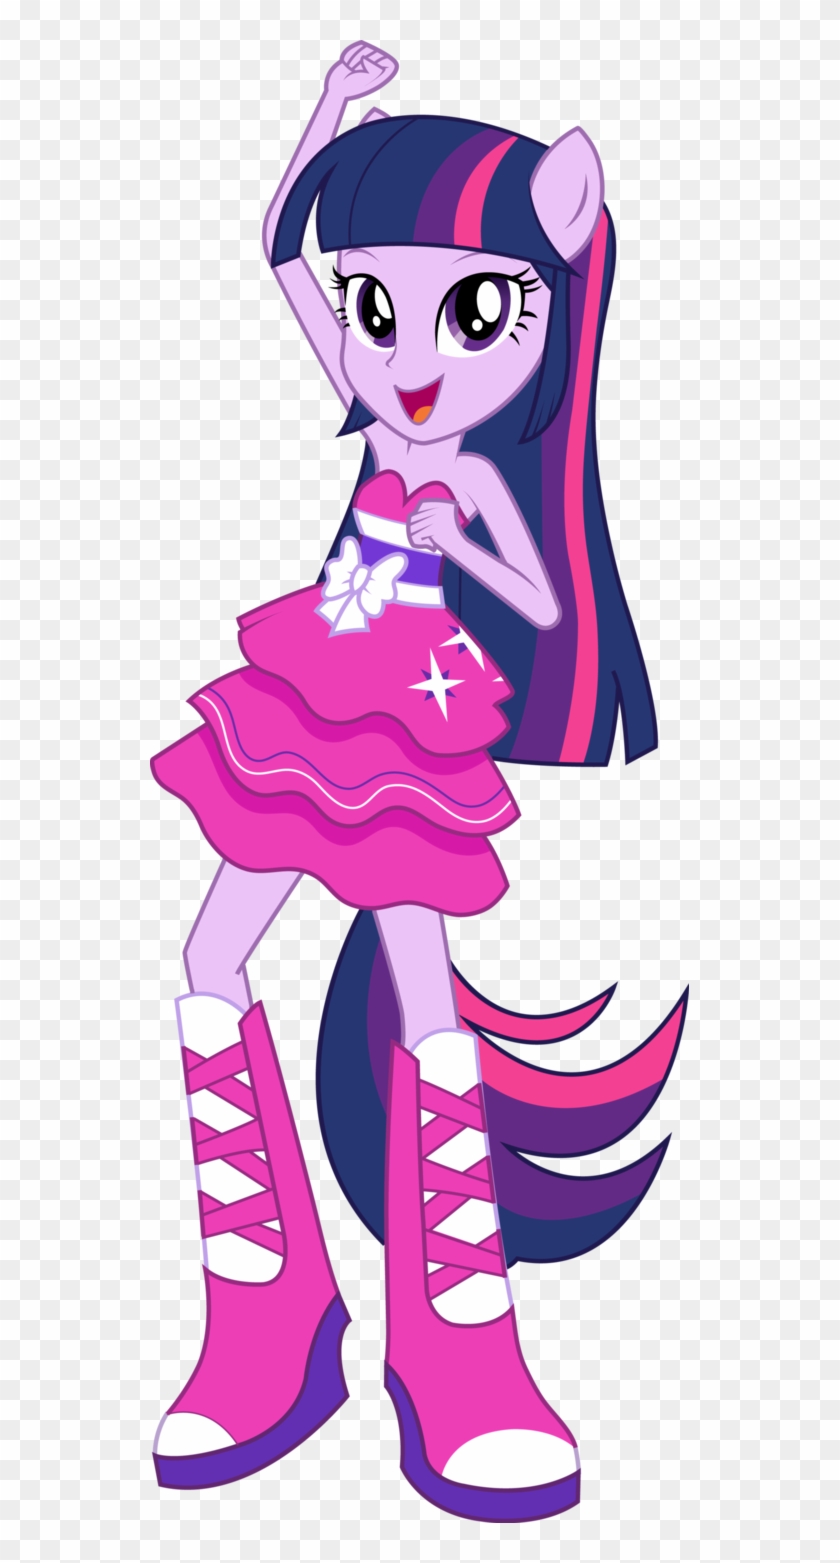 Twilight Sparkle Dance Vector By Icantunloveyou-d6te0lo - My Little Pony Equestria Girl Twilight Sparkle Dress #738062